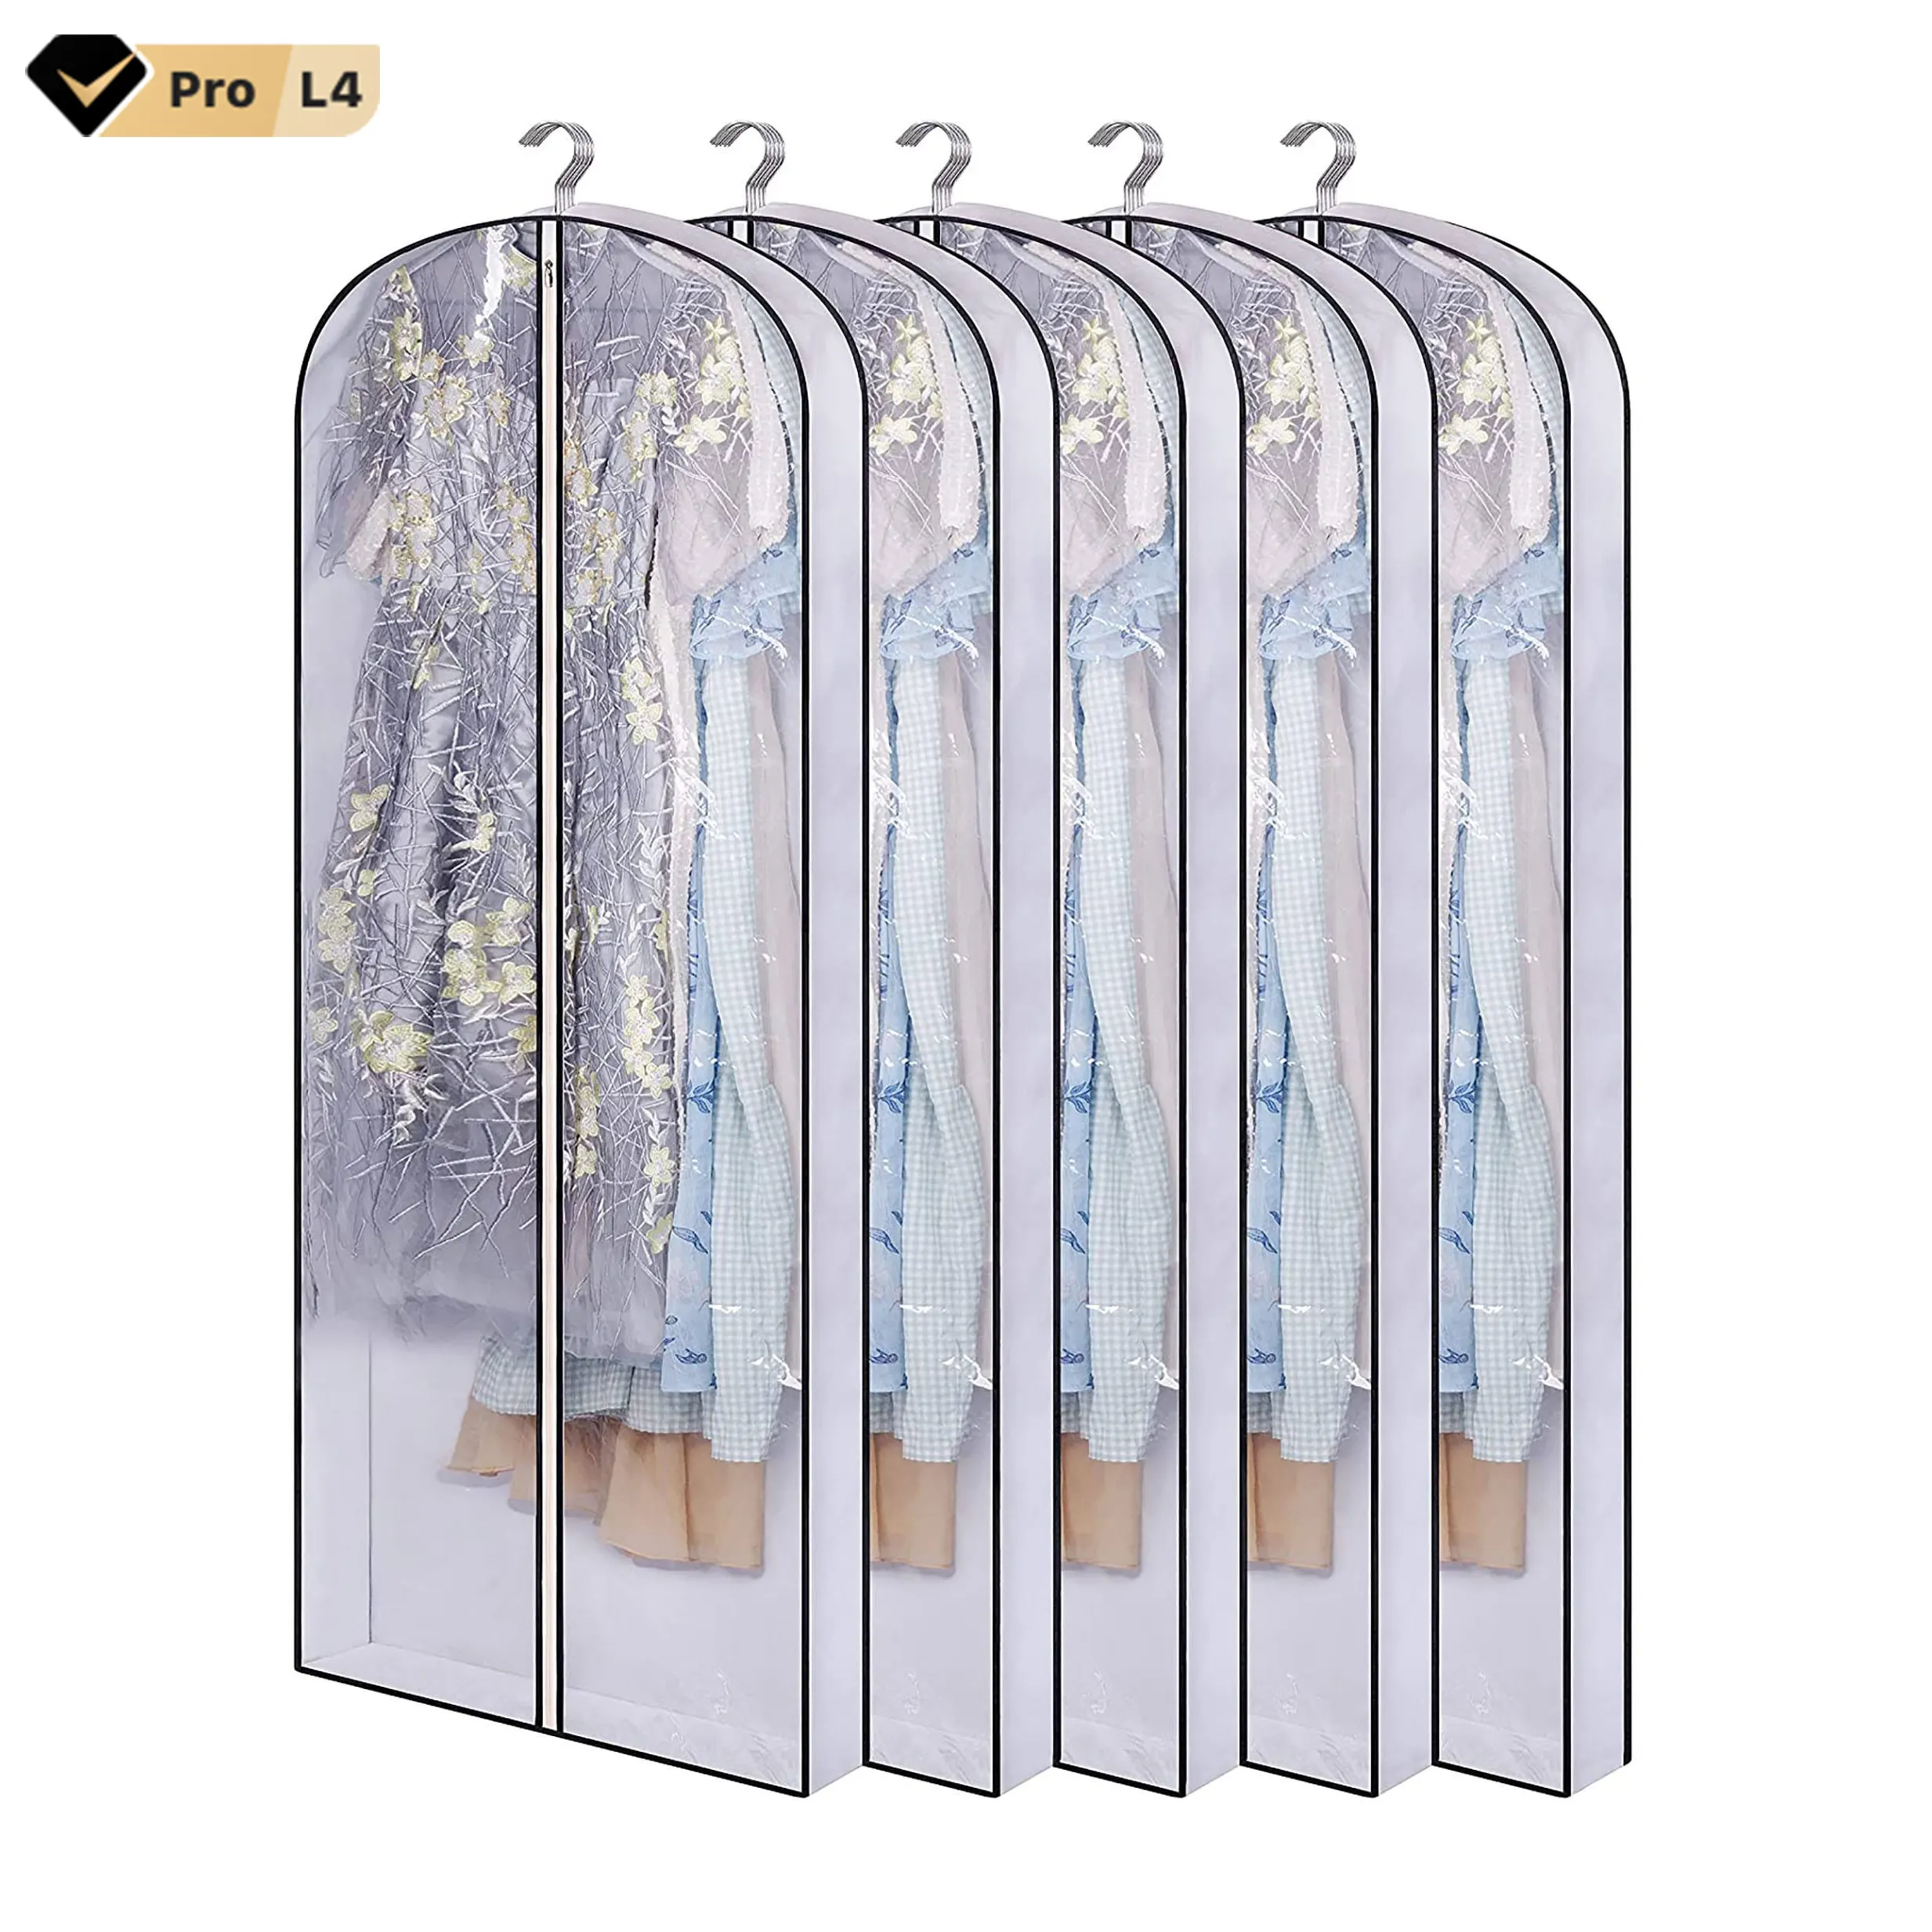 Hanging Garment Bags For Closet Storage Supplier Breathable Material Versatile Usage Clear Dress Garment Bag For Clothes